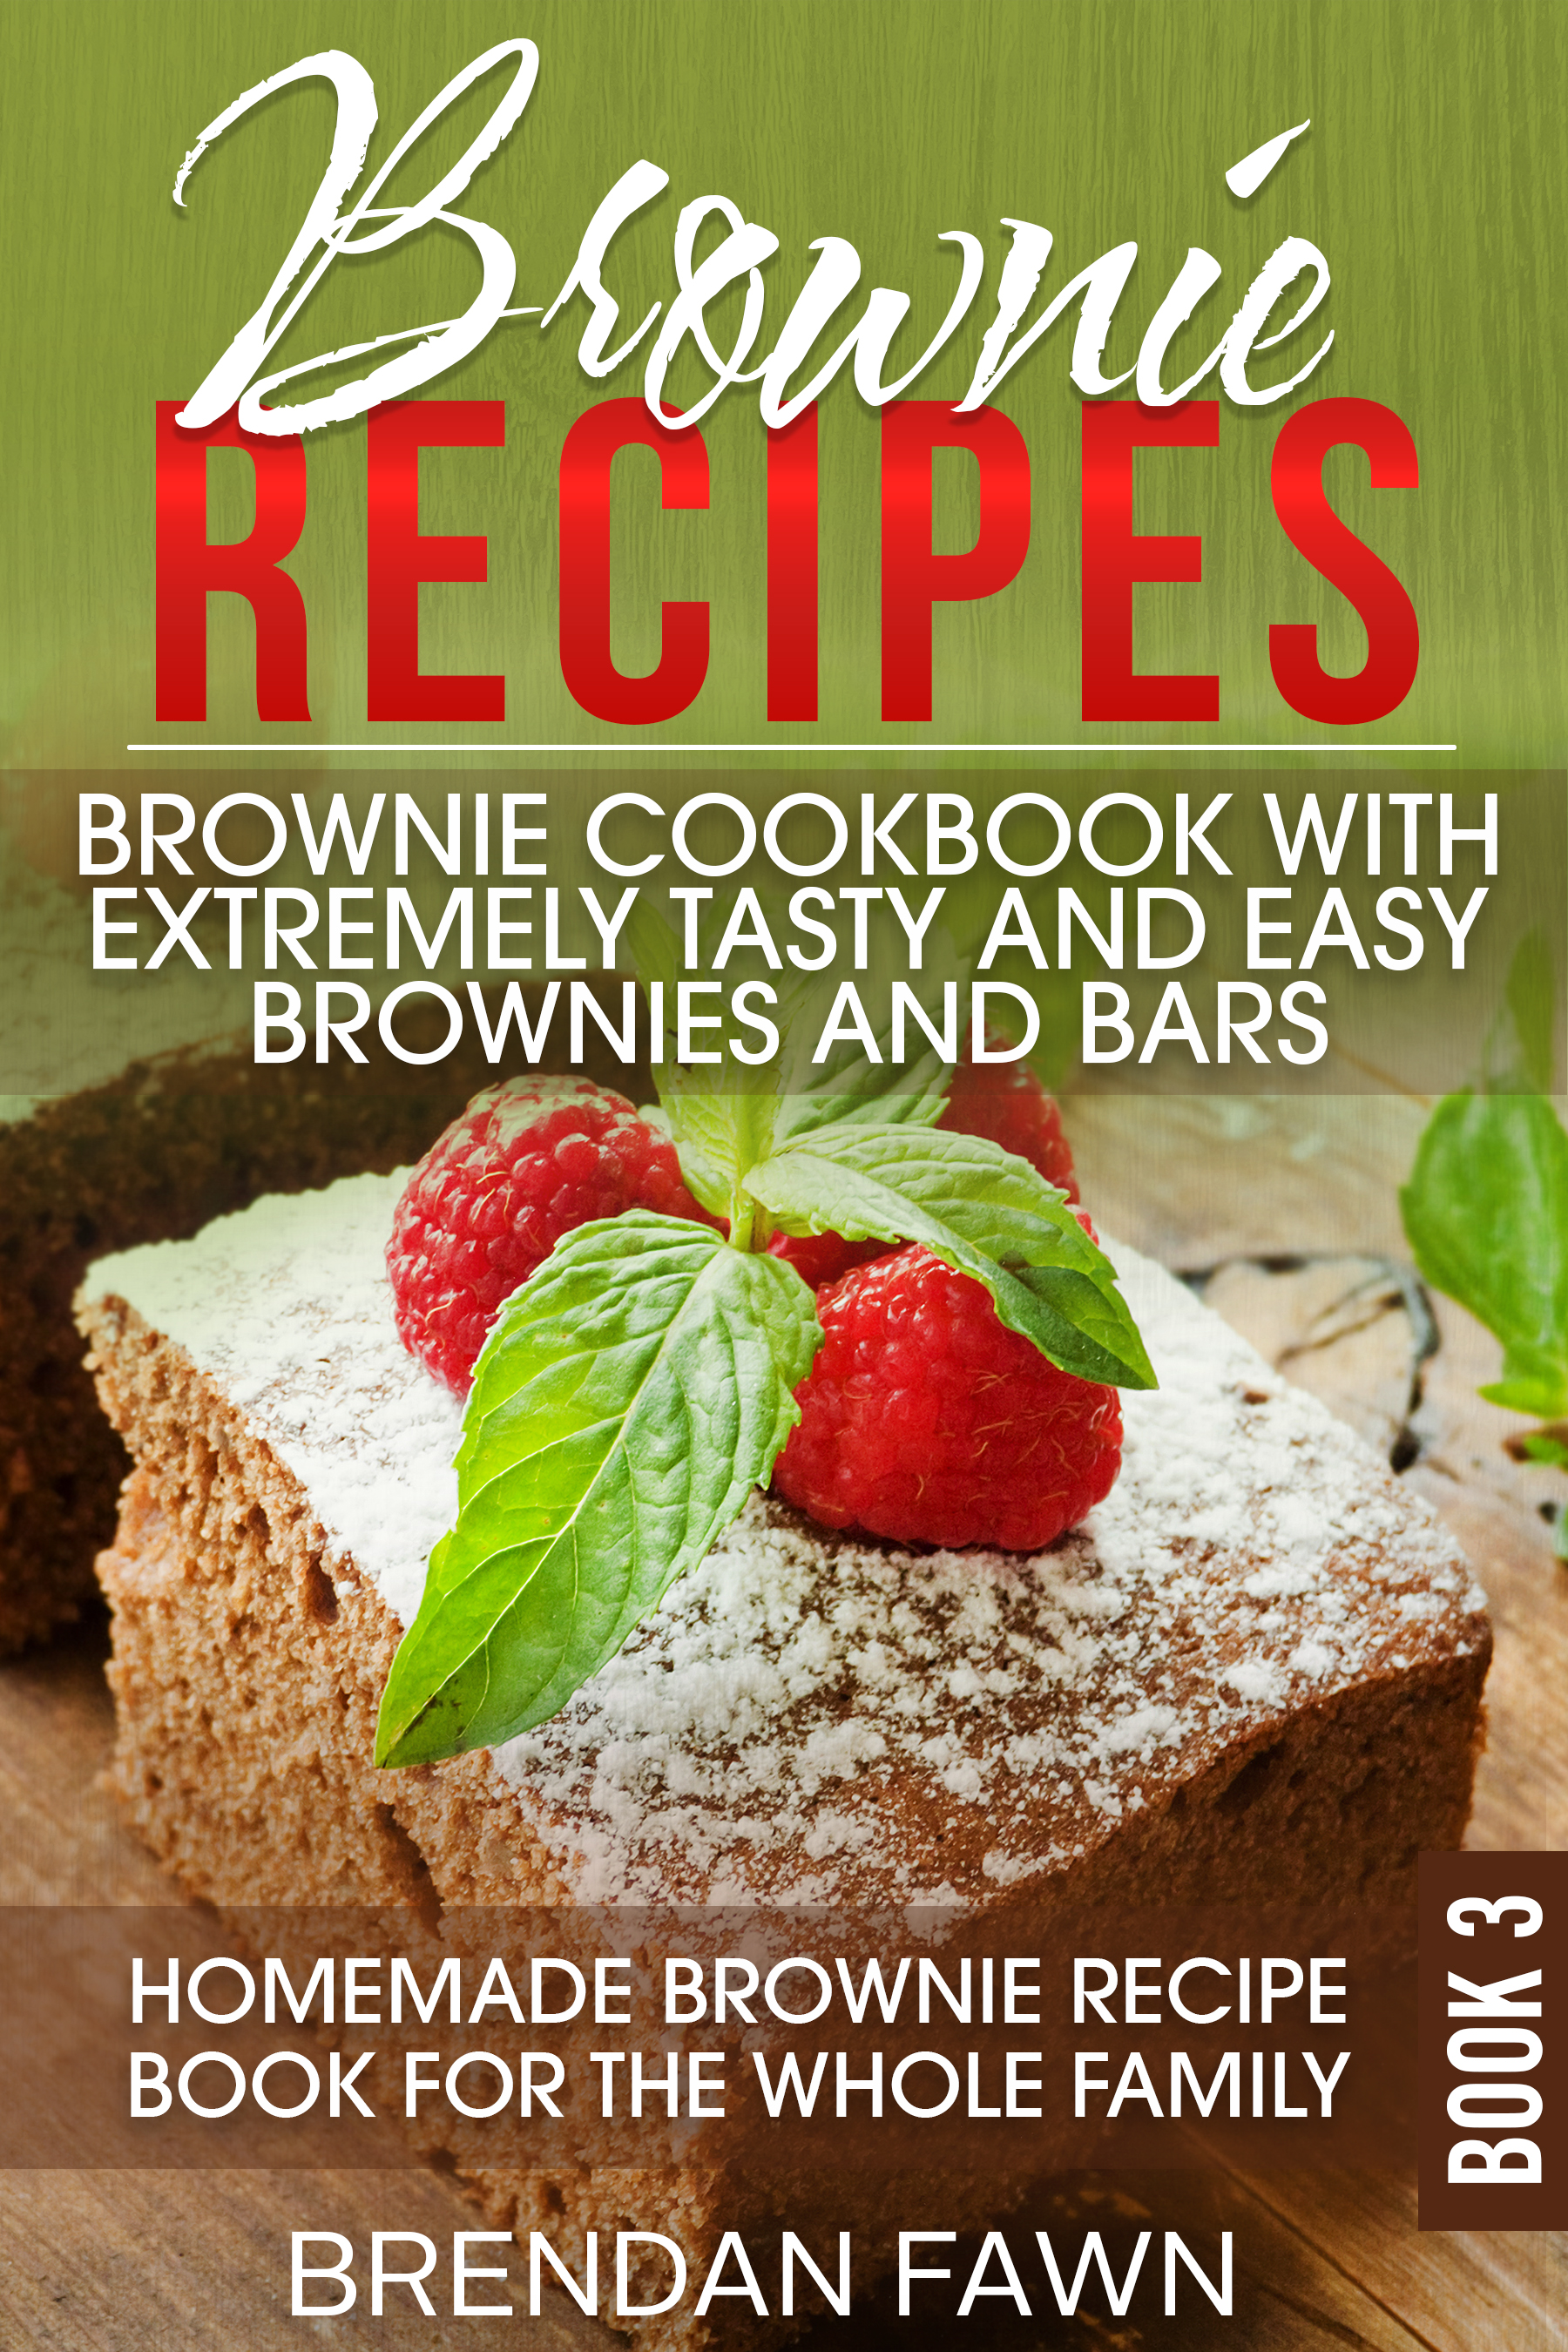 FREE: Brownie Recipes: Brownie Cookbook with Extremely Tasty and Easy Brownies and Bars: Homemade Brownie Recipe Book for the Whole Family by Brendan Fawn